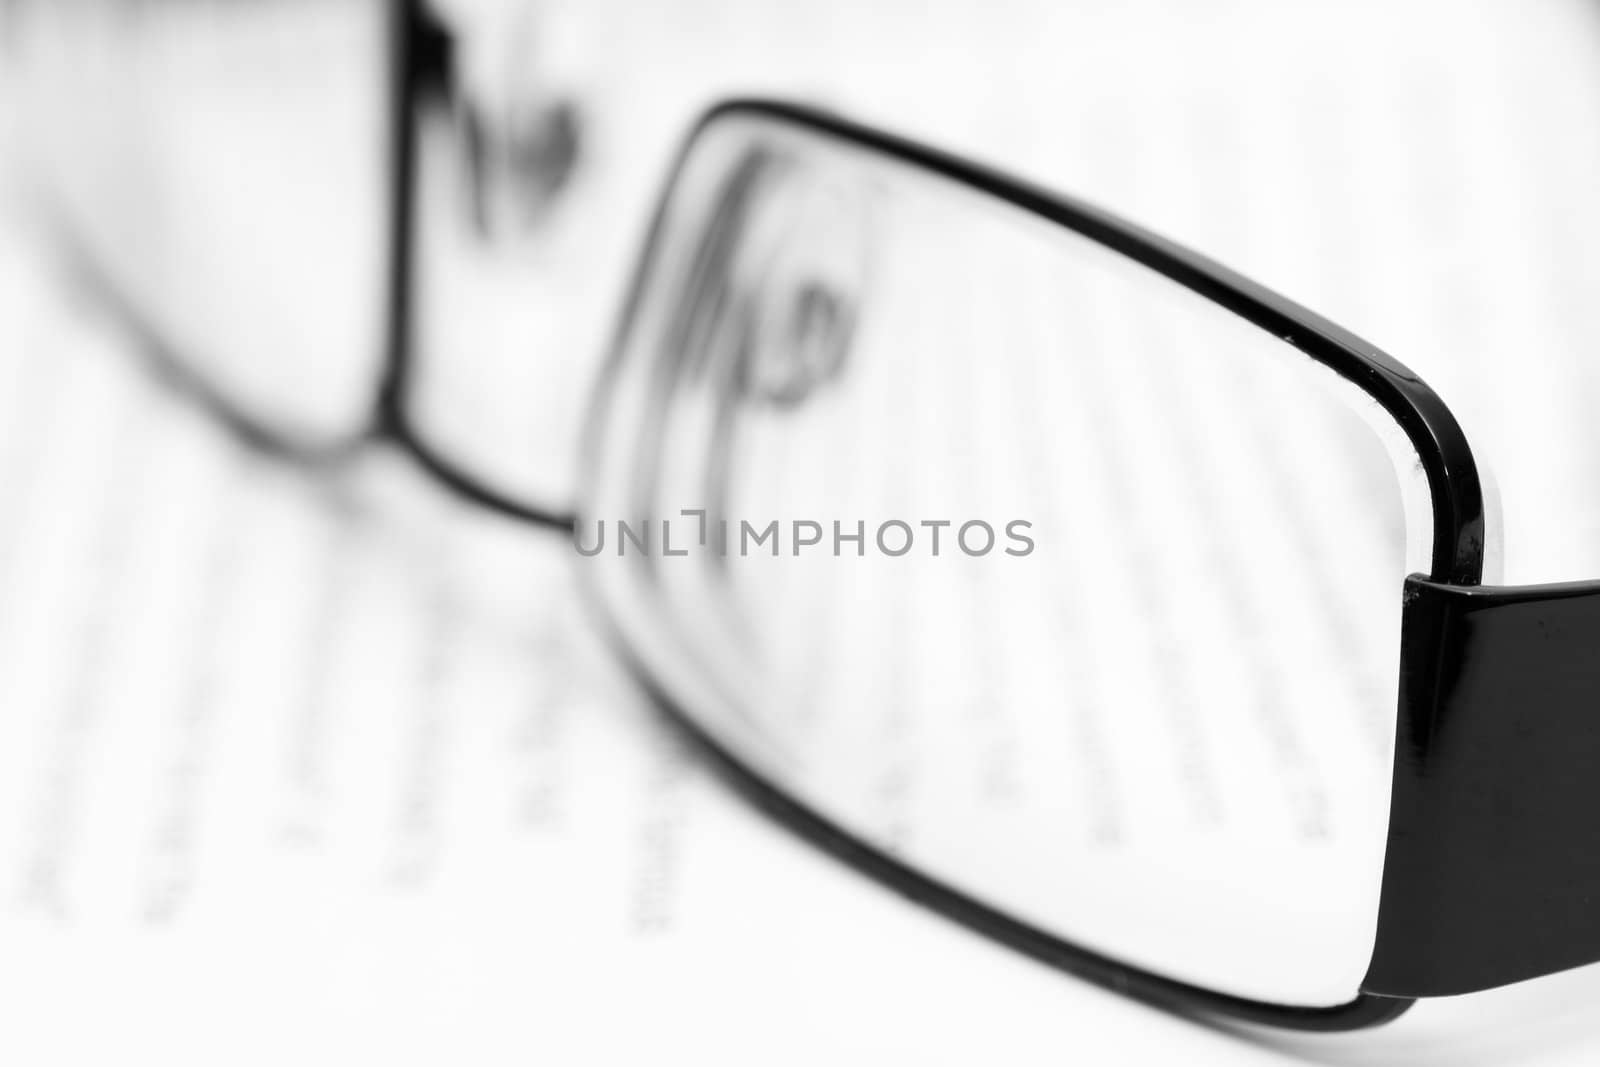 Eyeglasses on open book in black and white